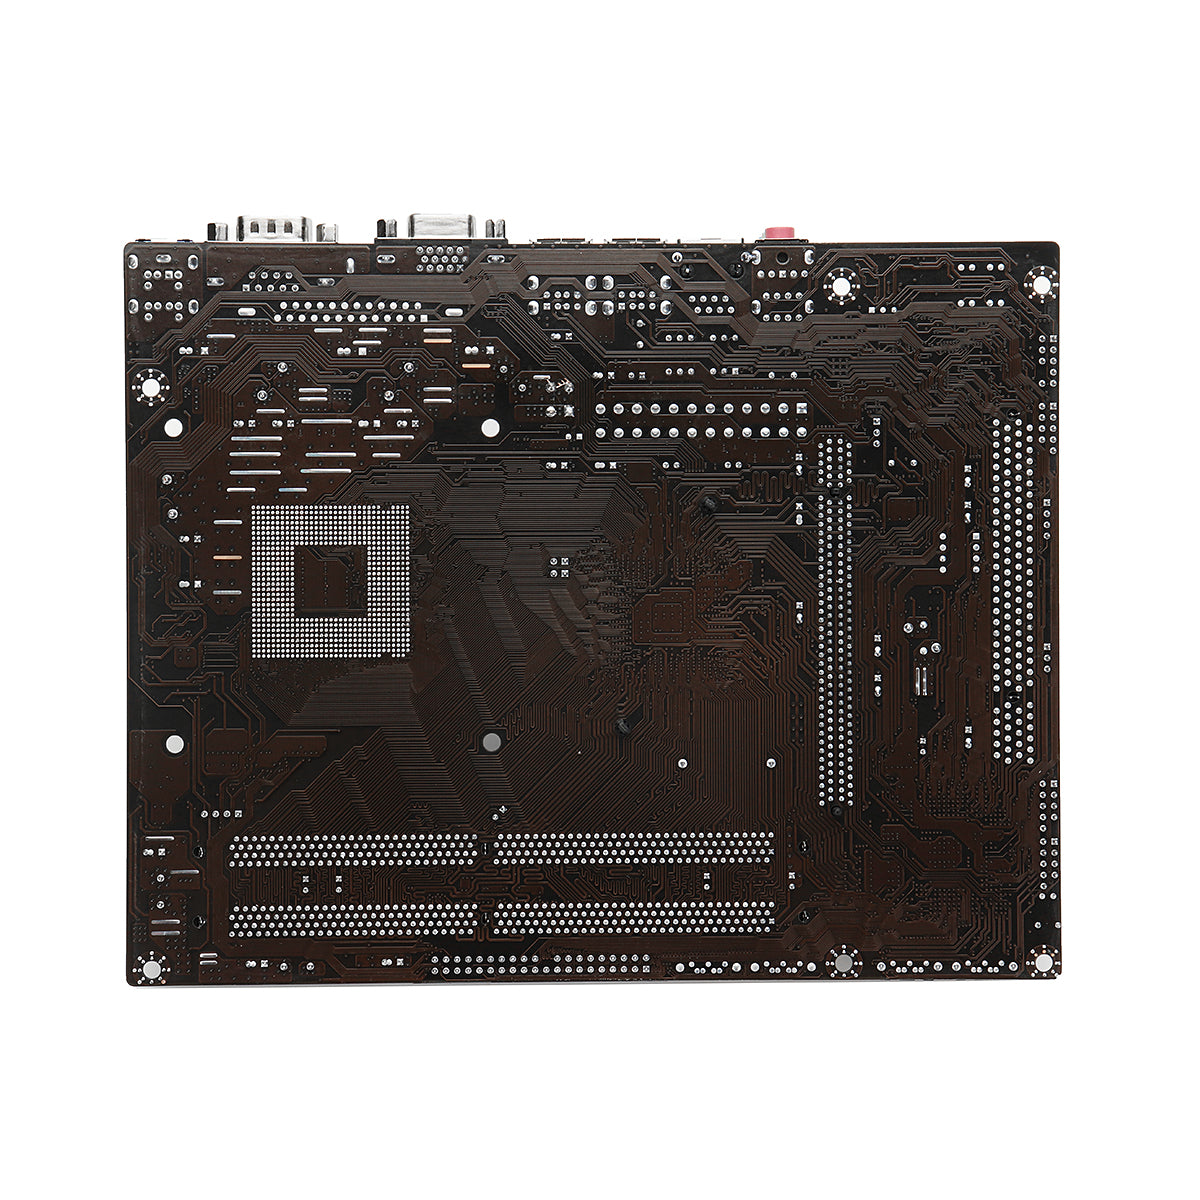 driver for intel nh82801gb motherboard